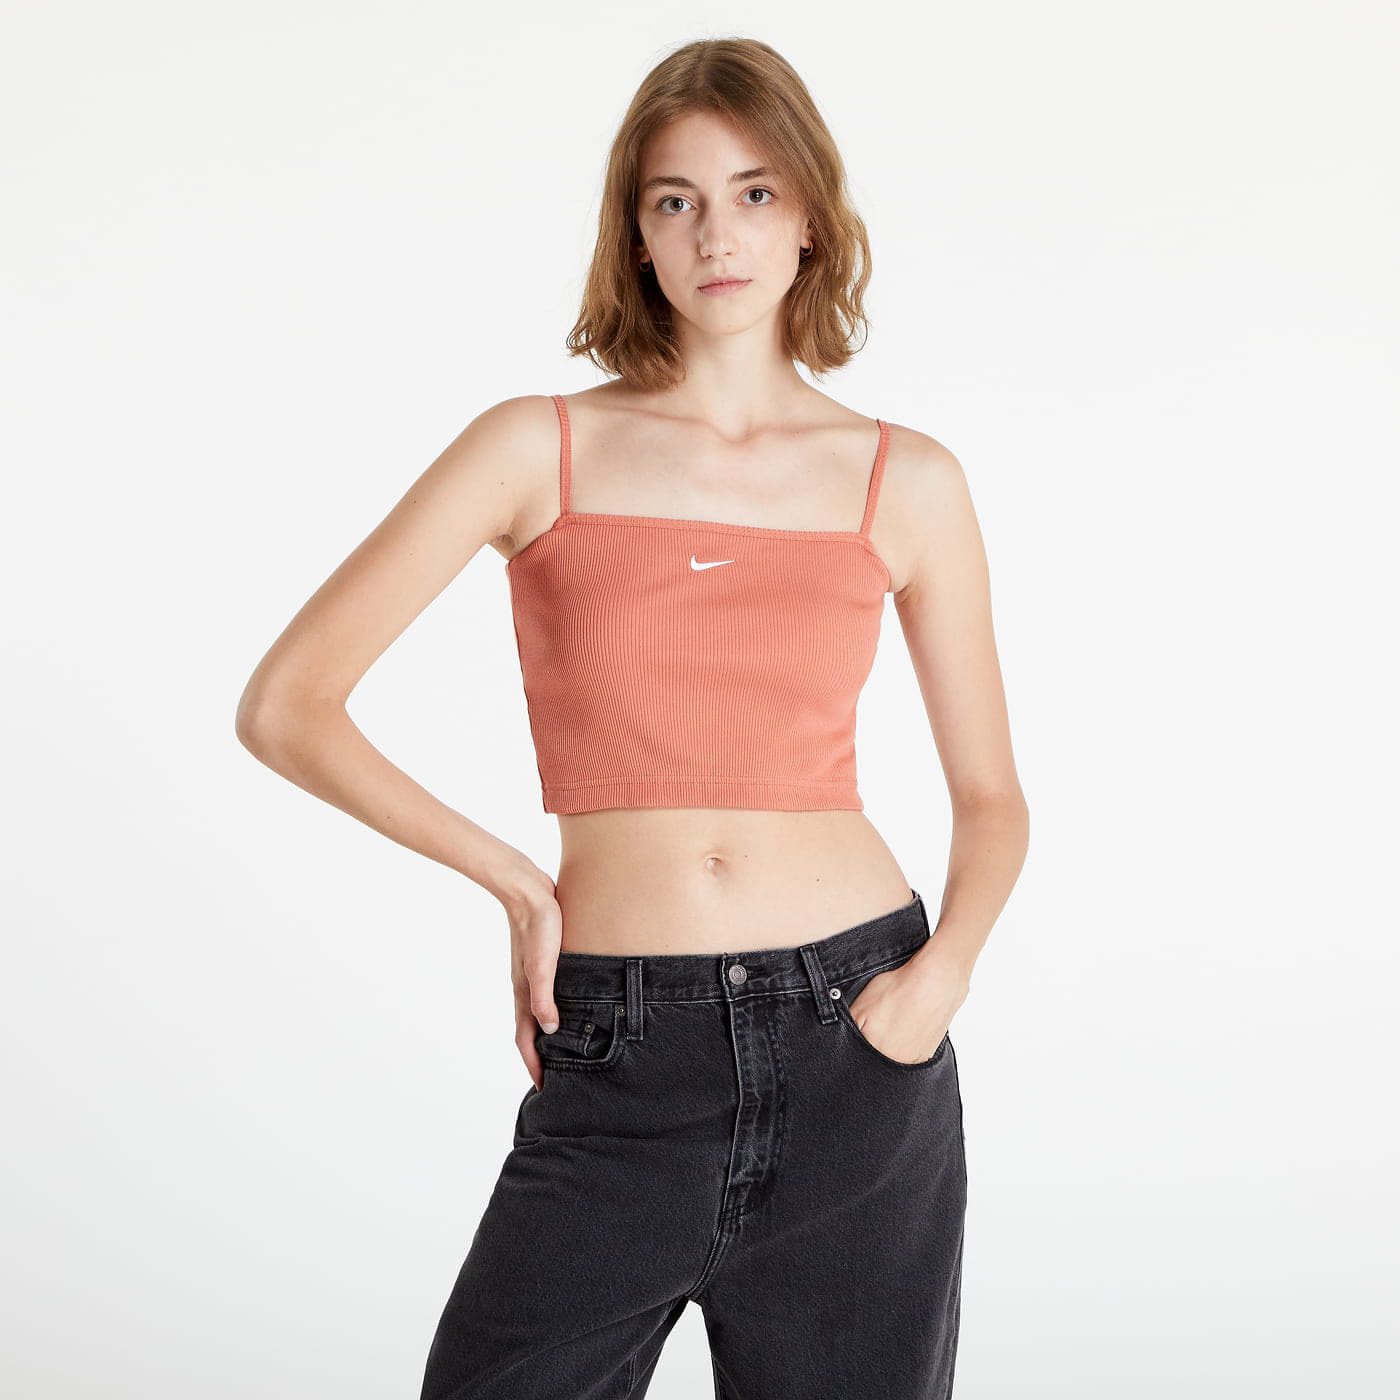 Nike - nsw essential ribbed crop top madder root/ white